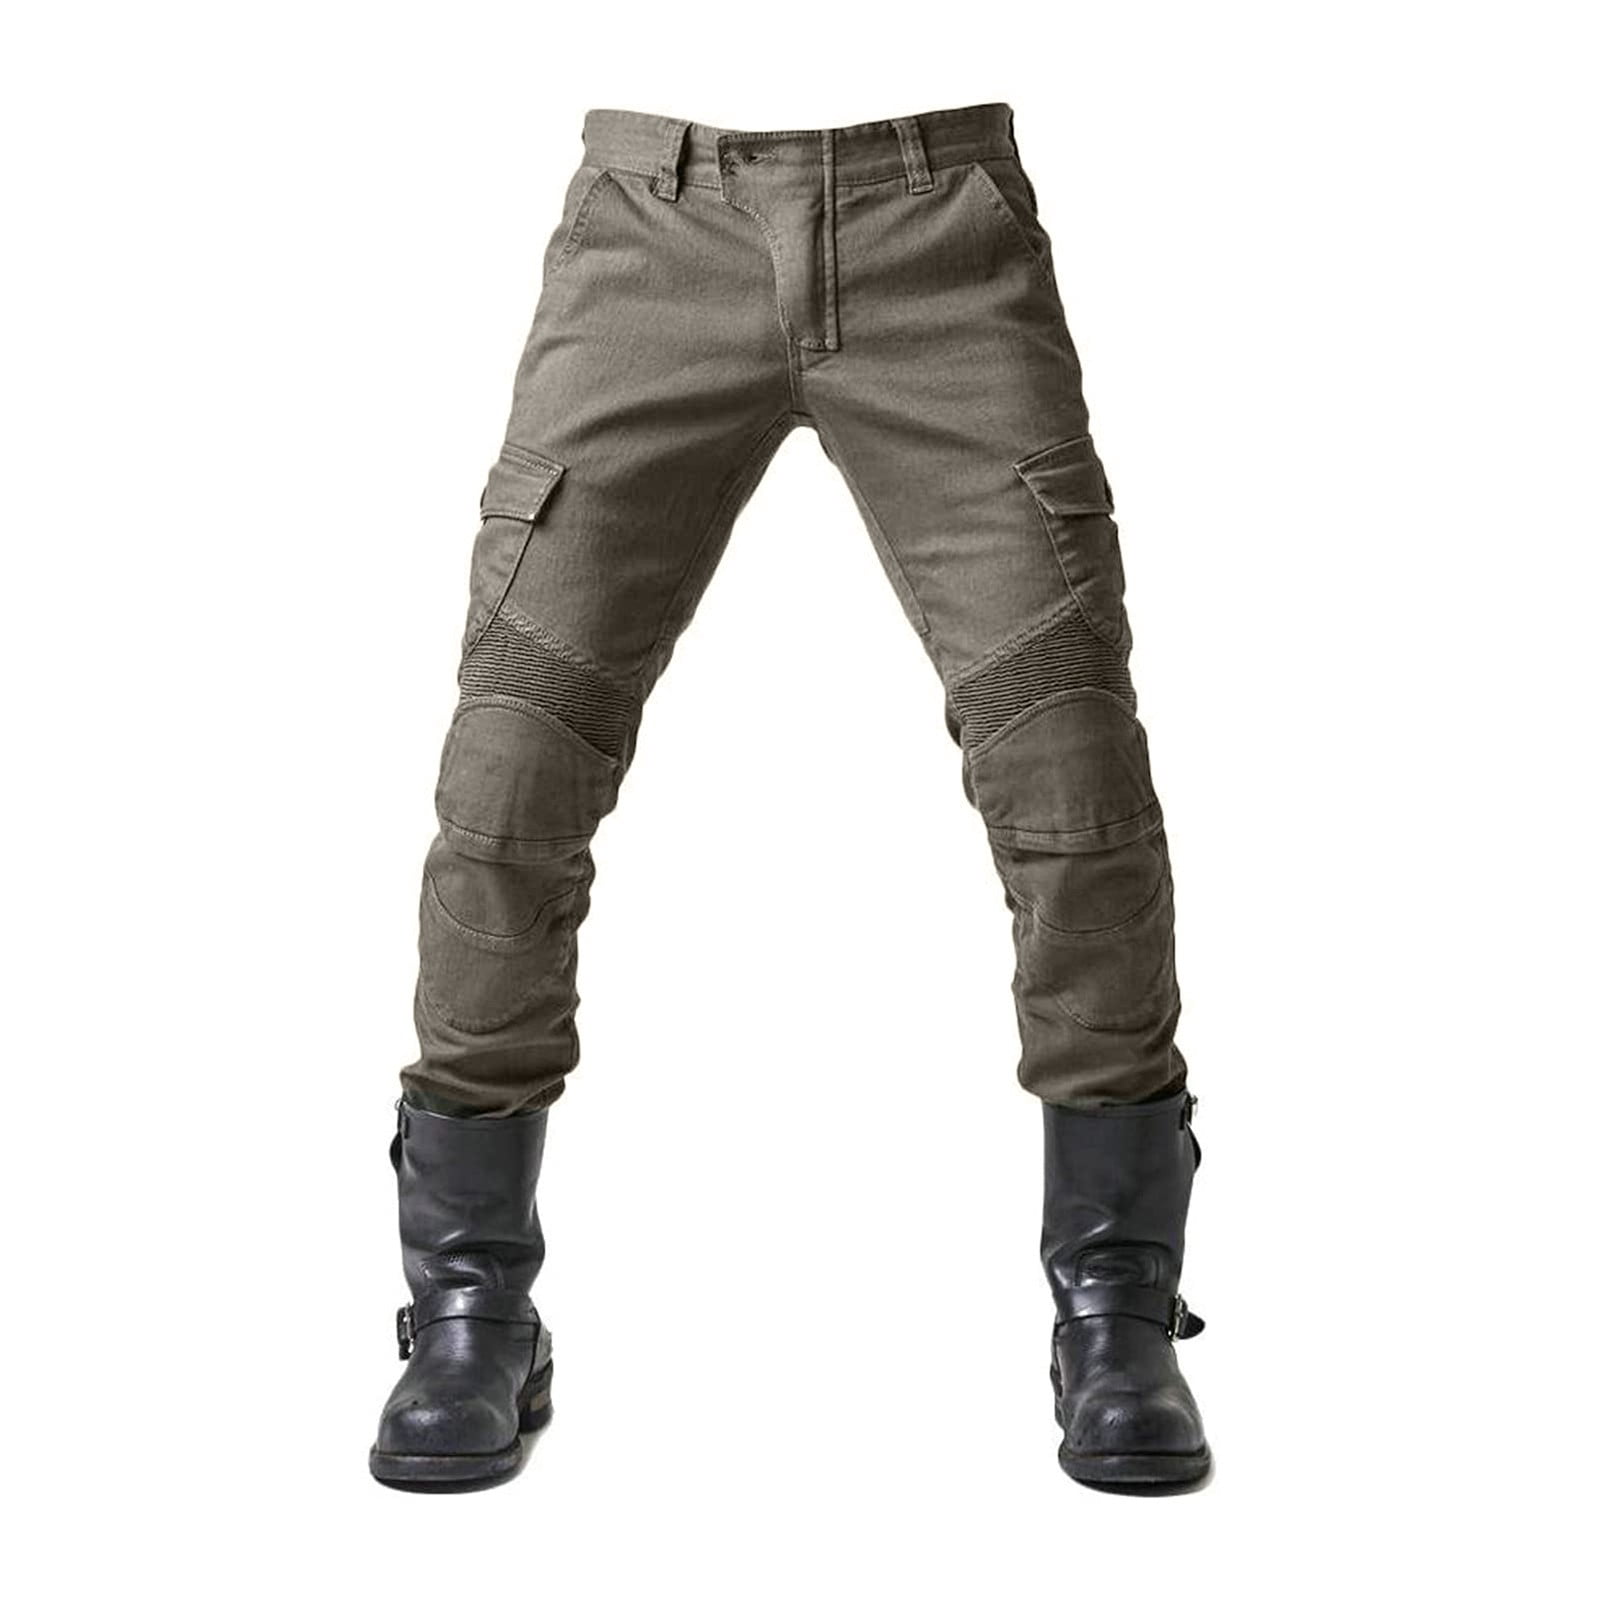 HaHaHappy Women's Cargo Pants Relaxed Fit Camo Pants Straight Leg ...